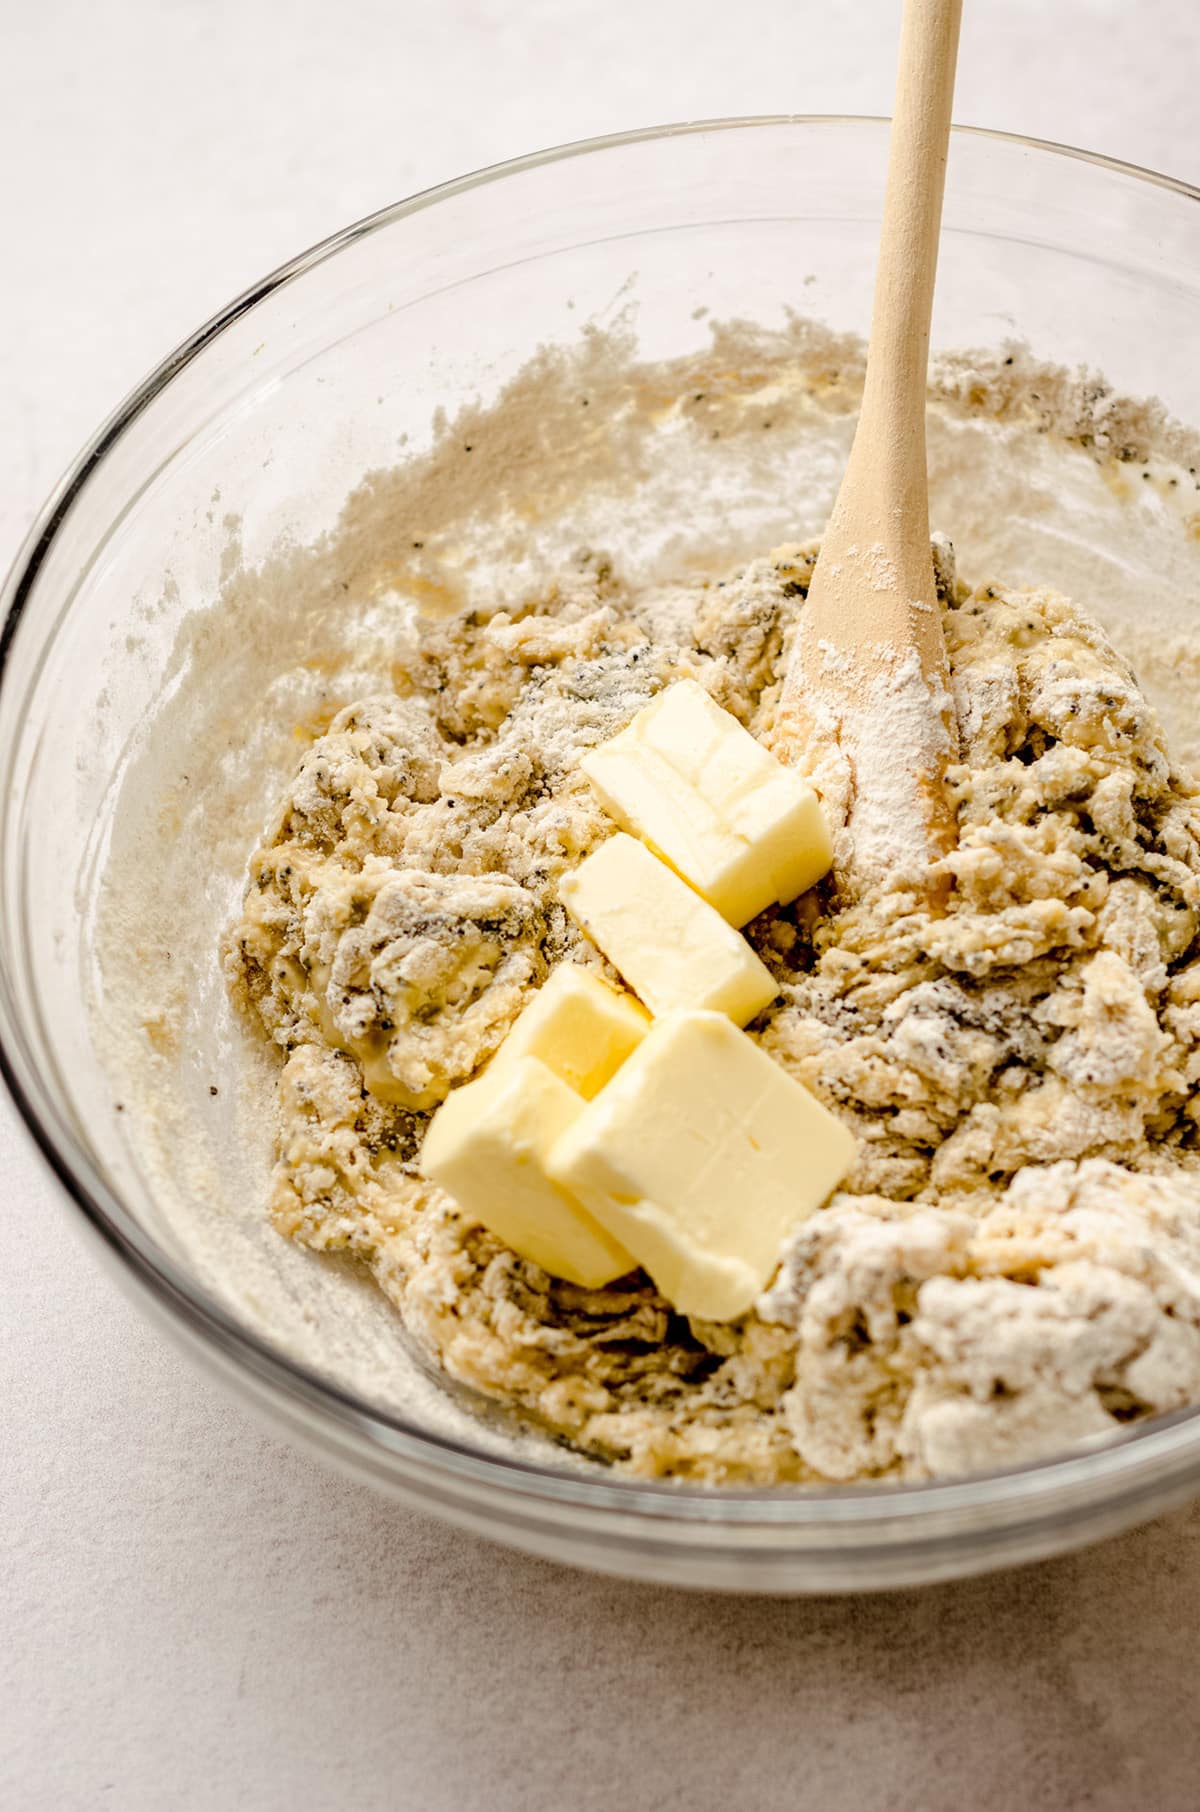 Adding softened butter to a bowl of sweet roll batter with poppy seeds.